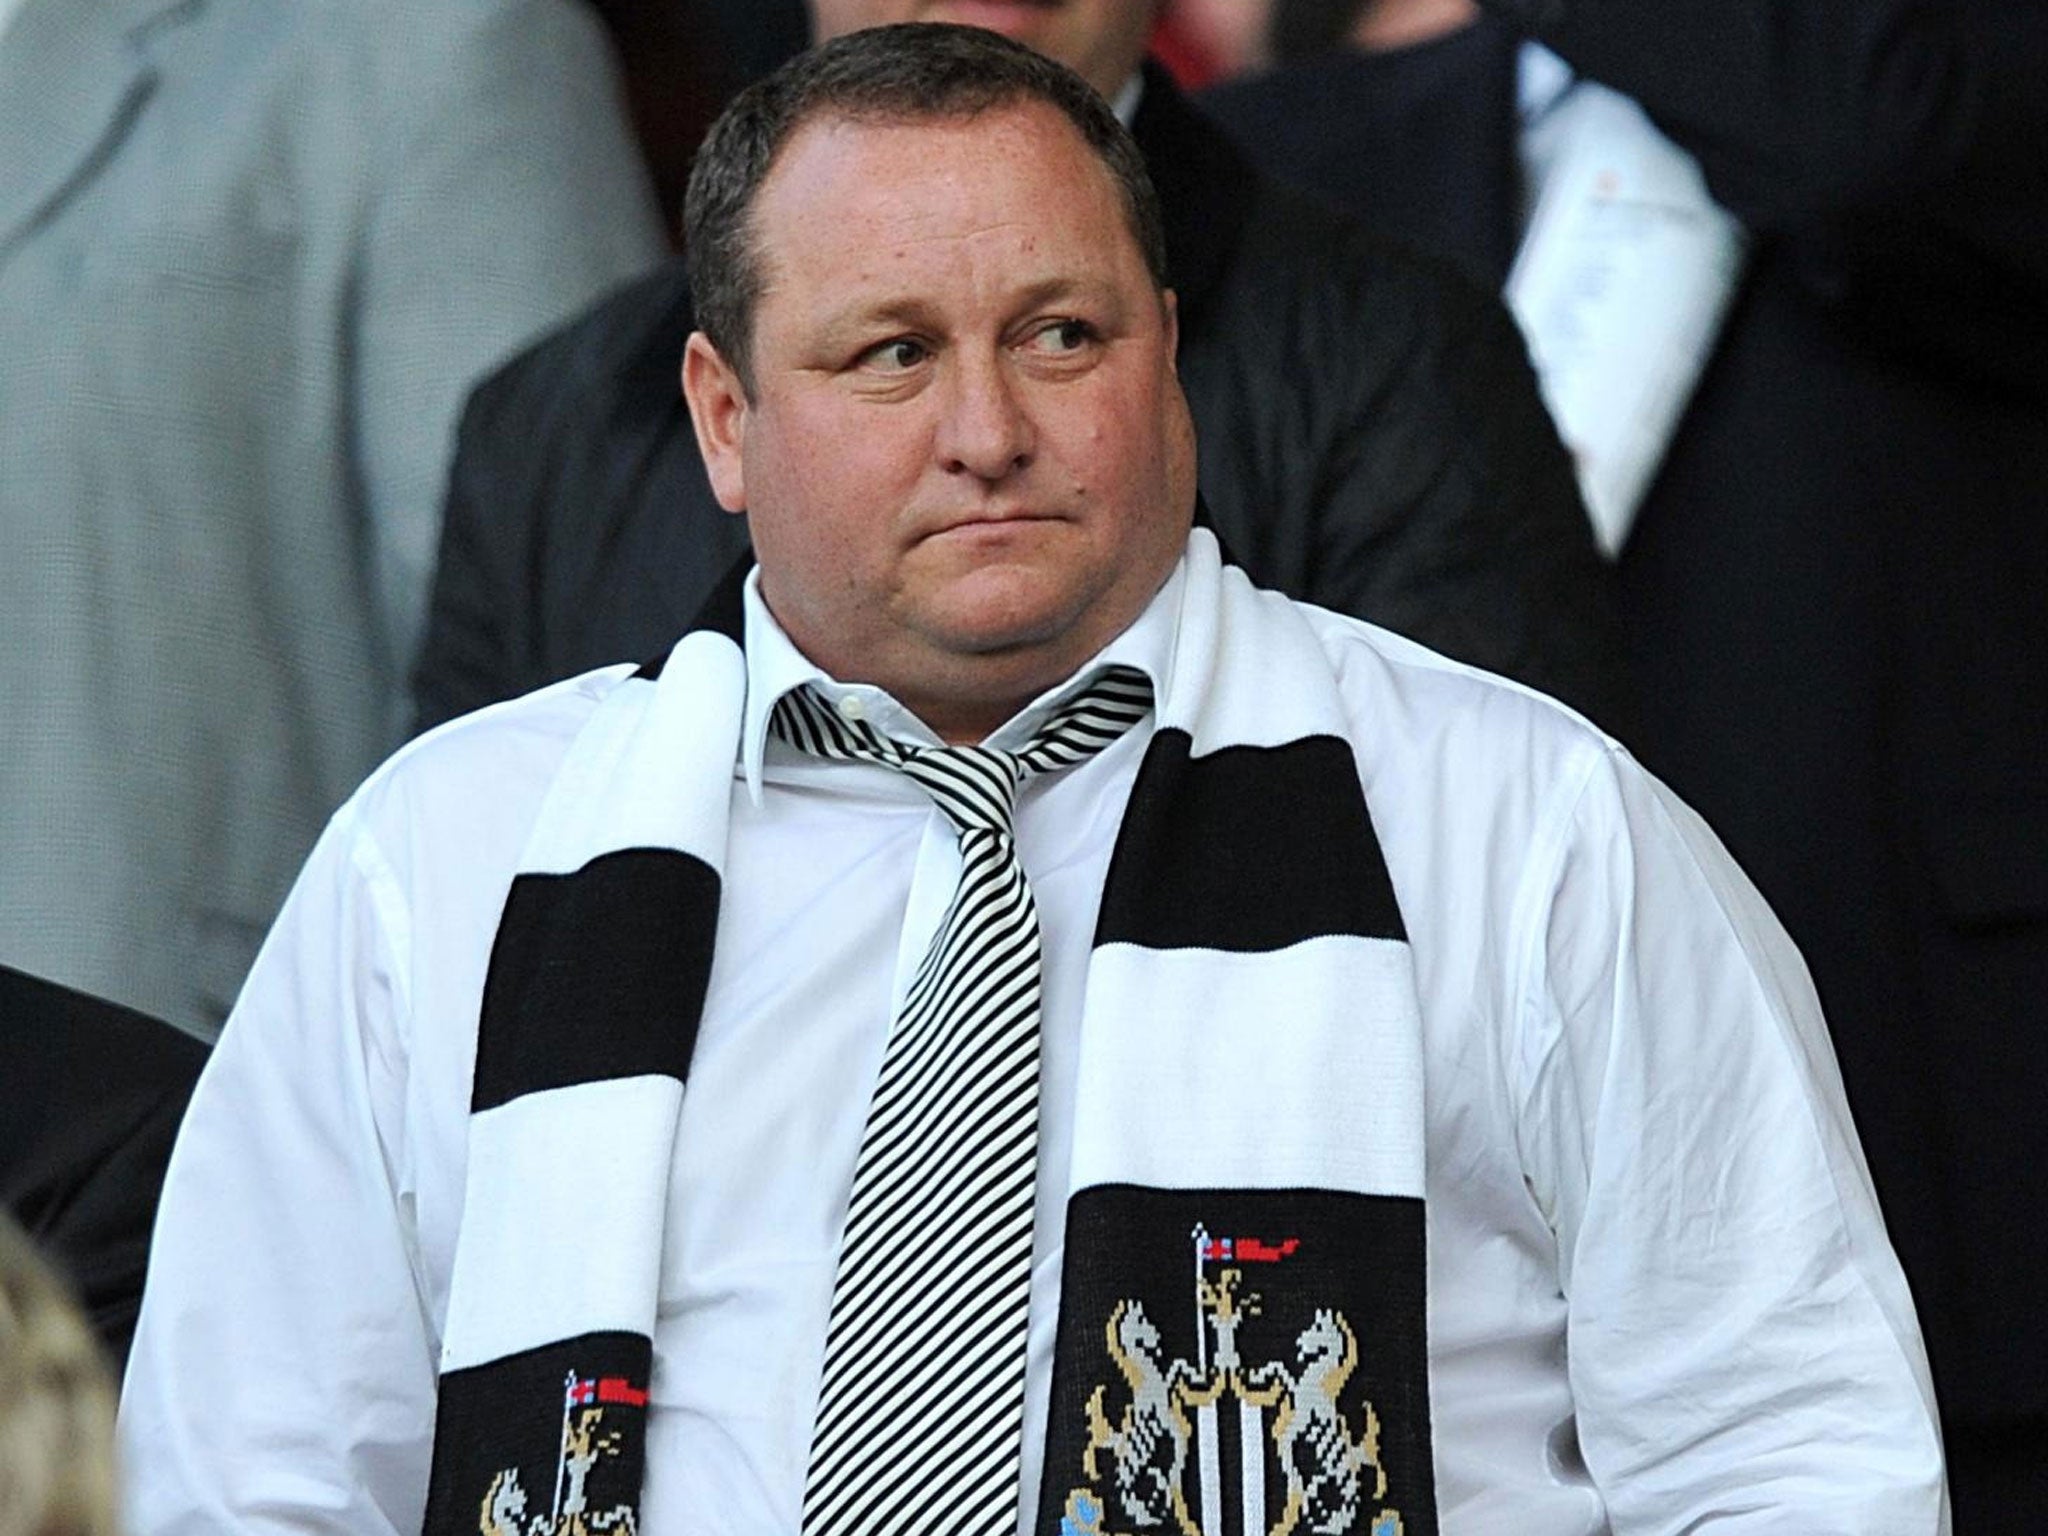 Mike Ashleyis also the owner of Newcastle United